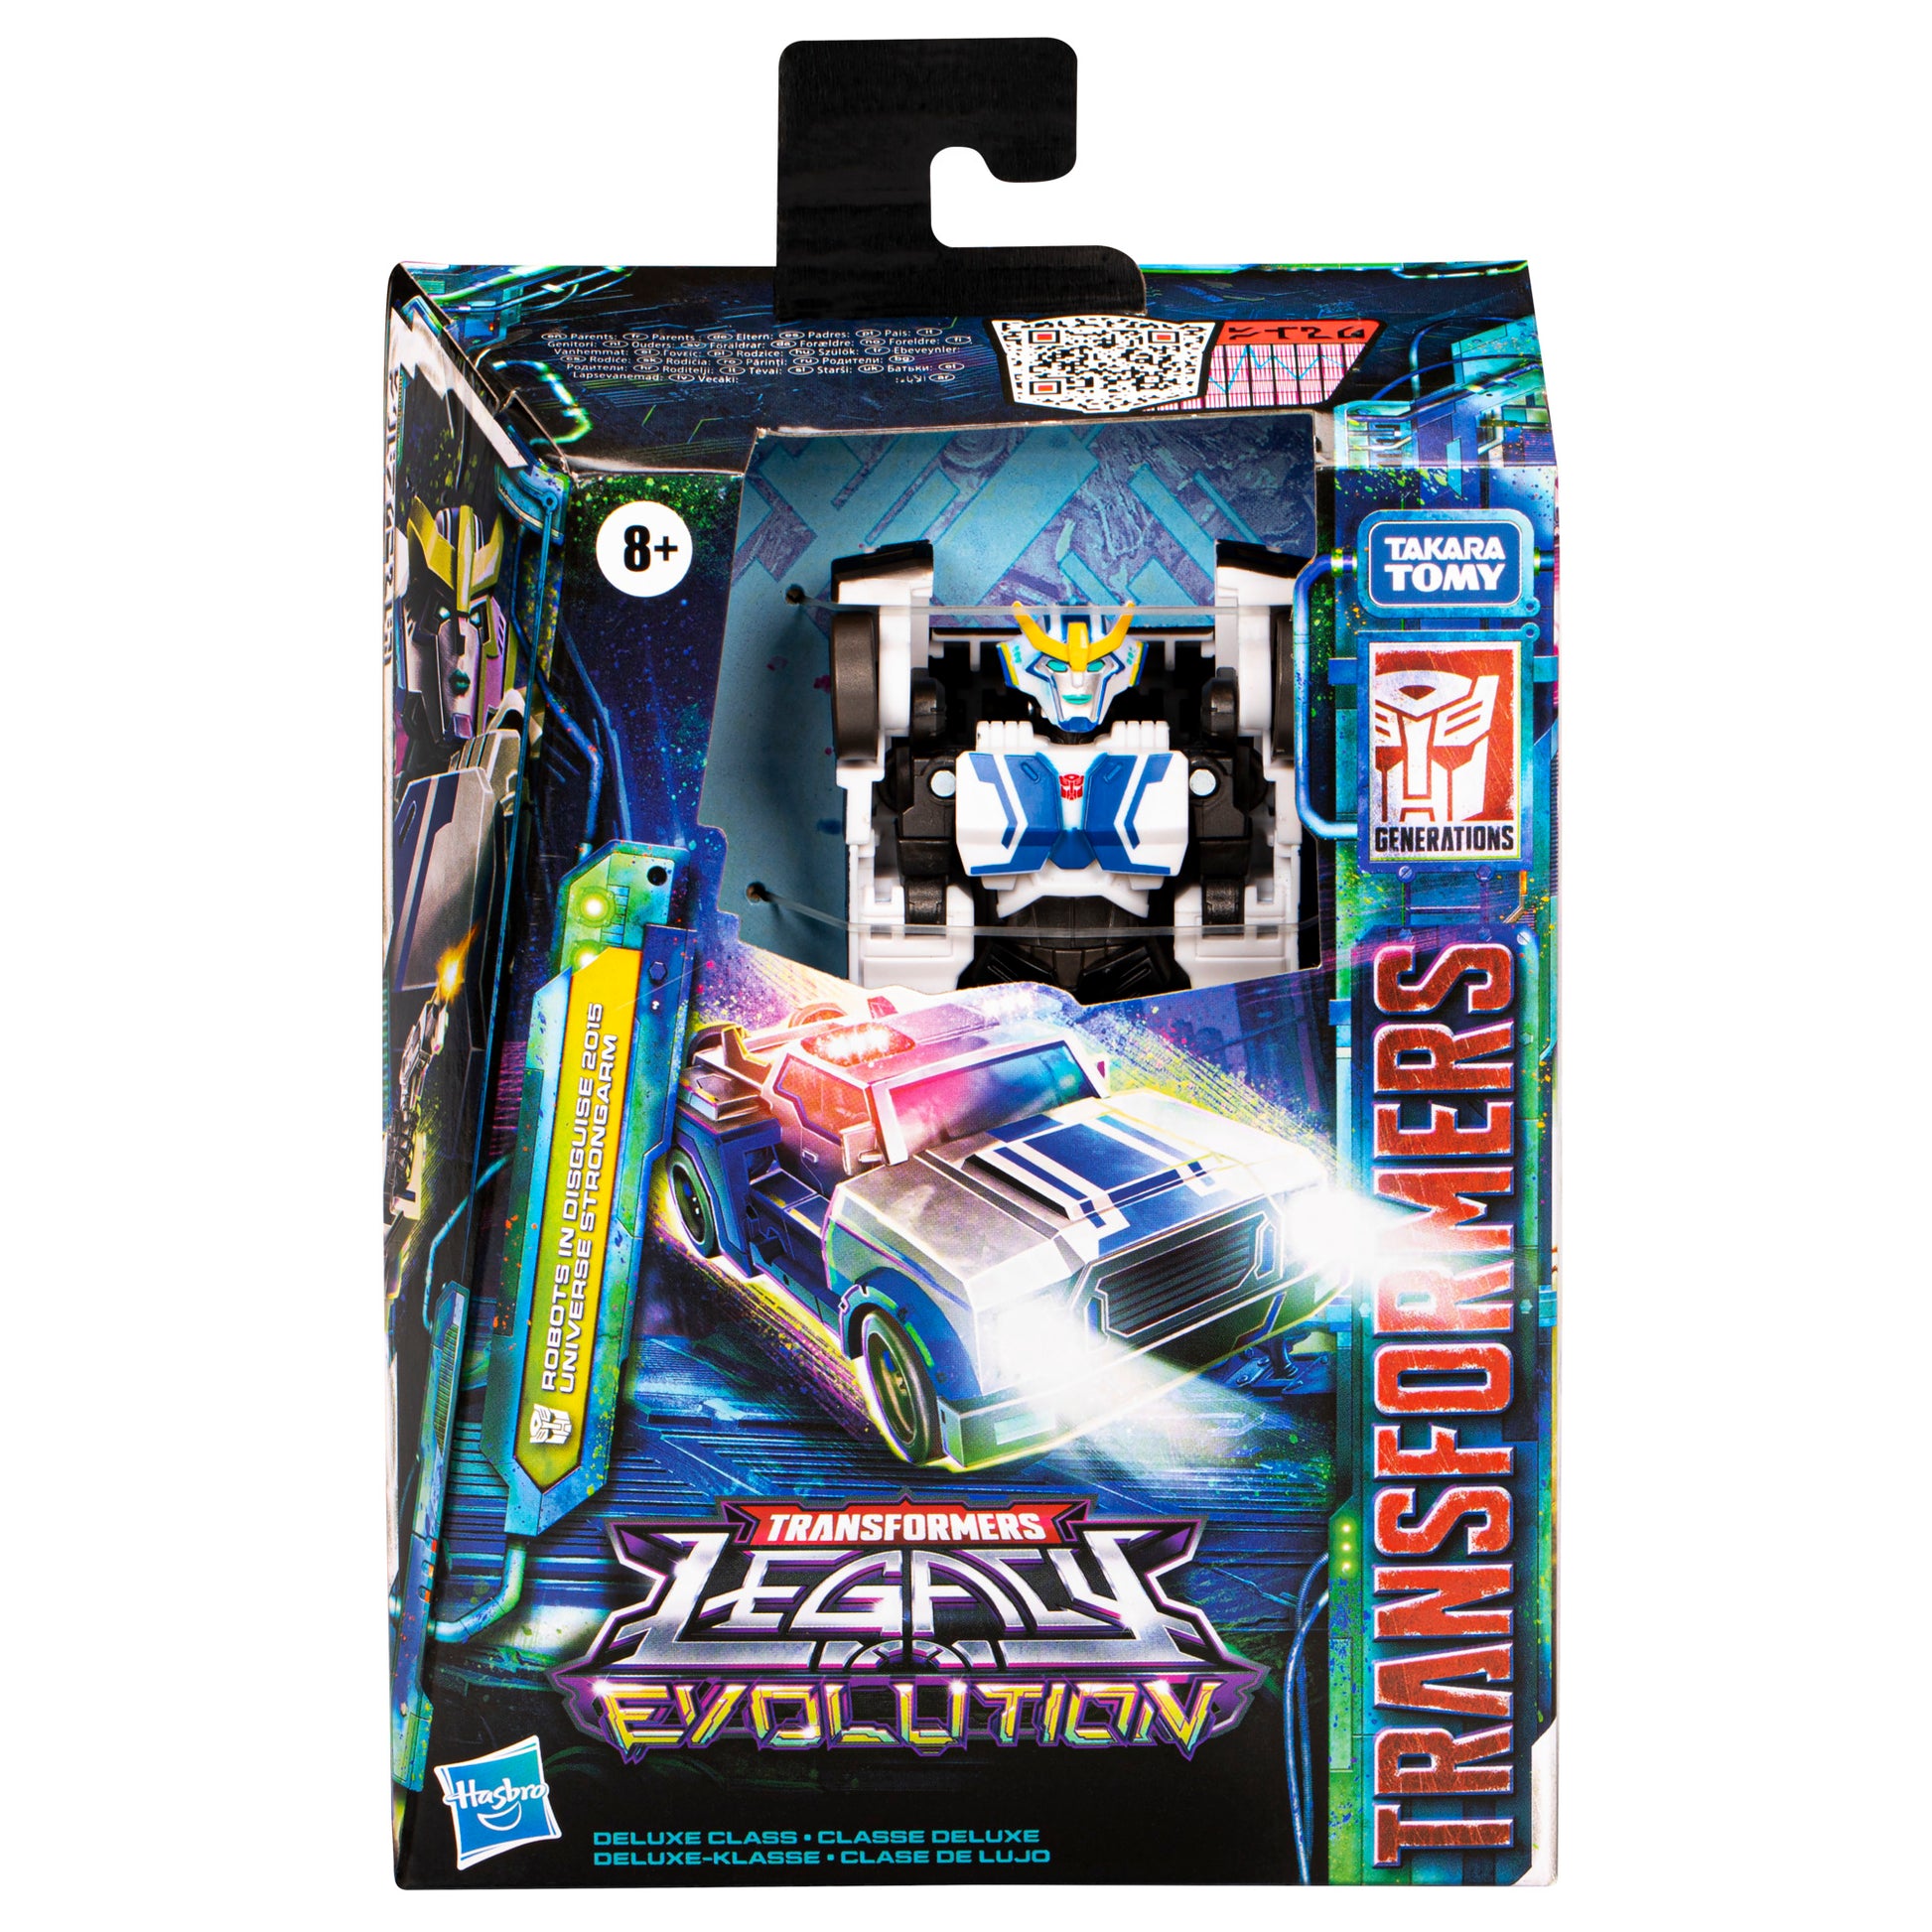 Universe Strongarm Action Figure Toy in a package front view - heretoserveyou